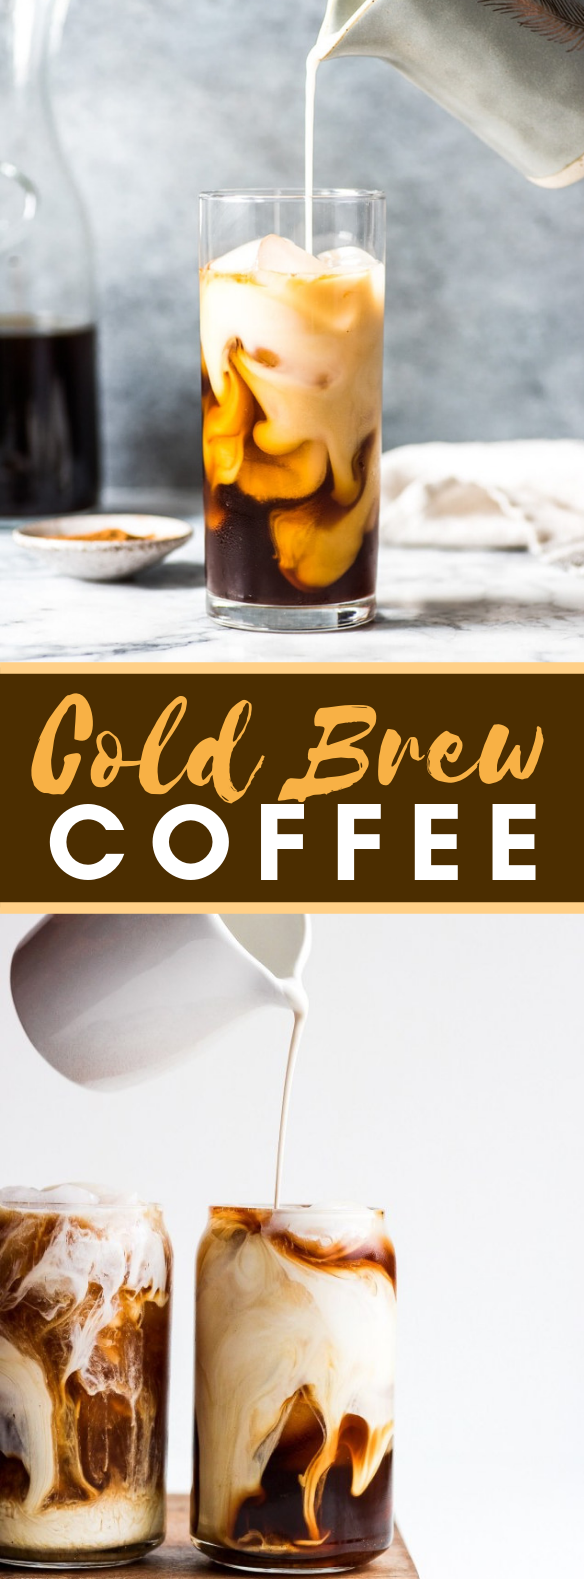 HOW TO MAKE COLD BREW COFFEE #drinks #coldbrew